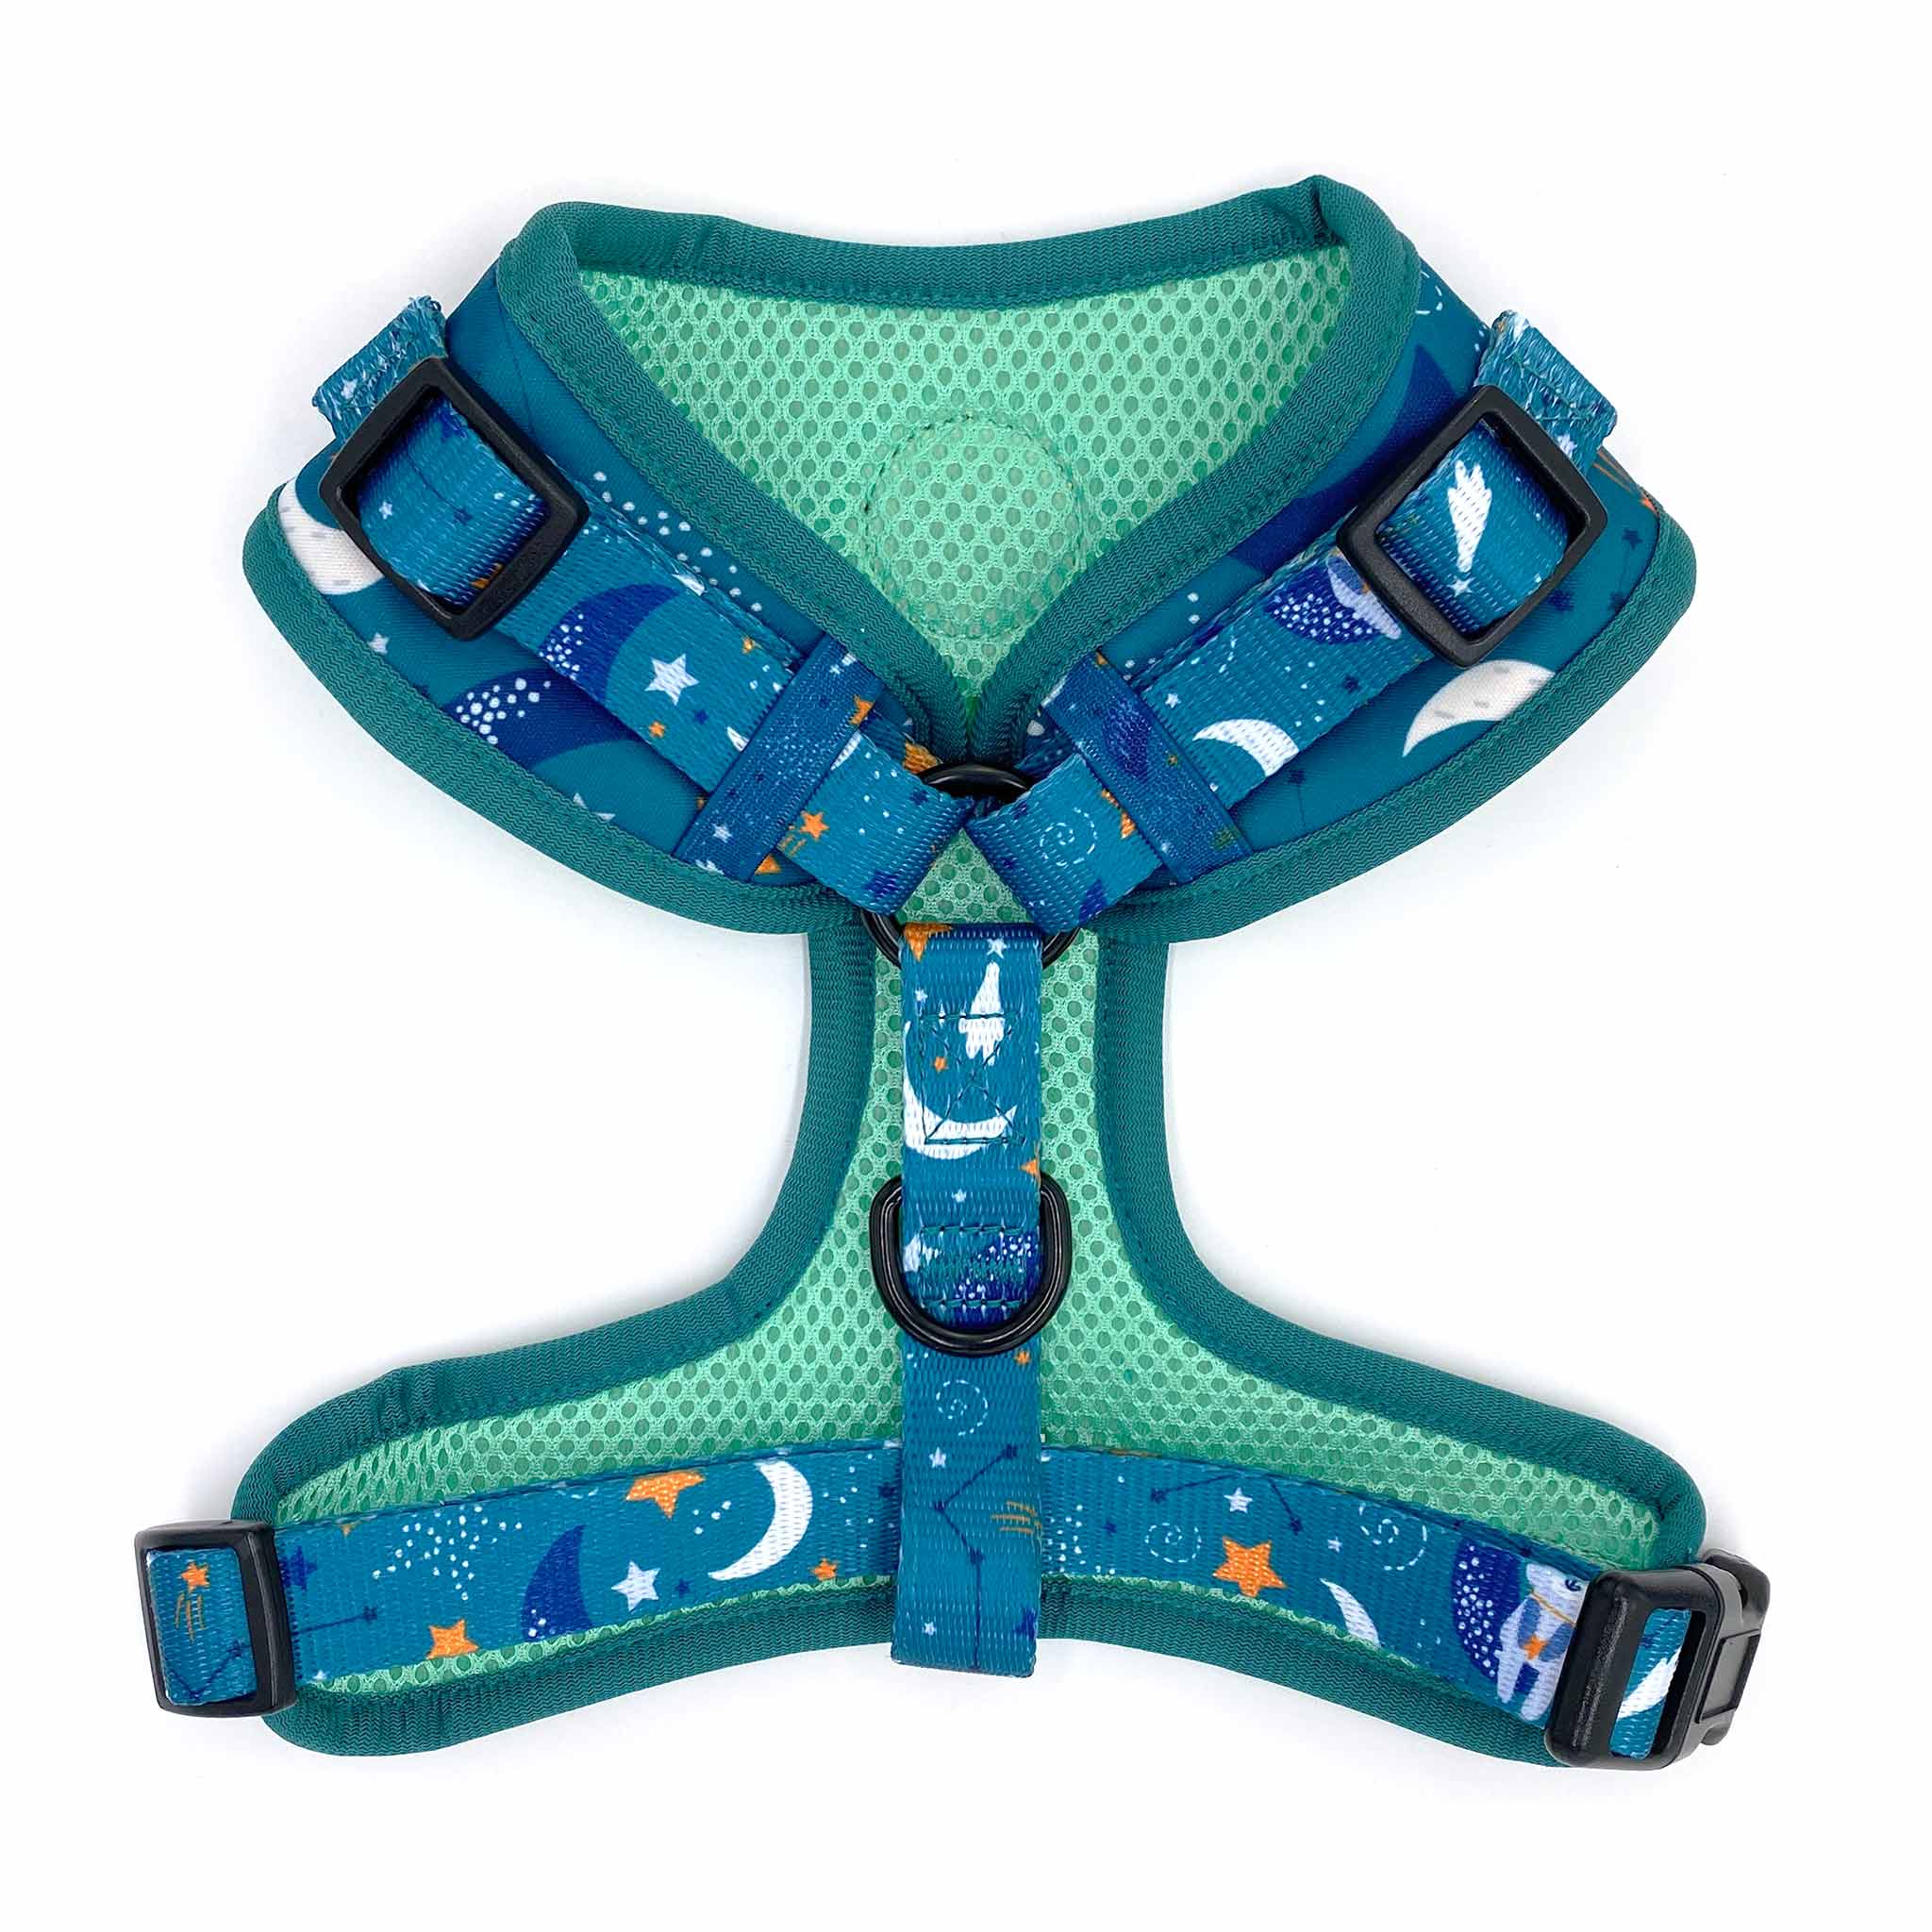 Back view of Pipco Pets adjustable dog harness with Starry Night outer space and stars print pattern in teal 